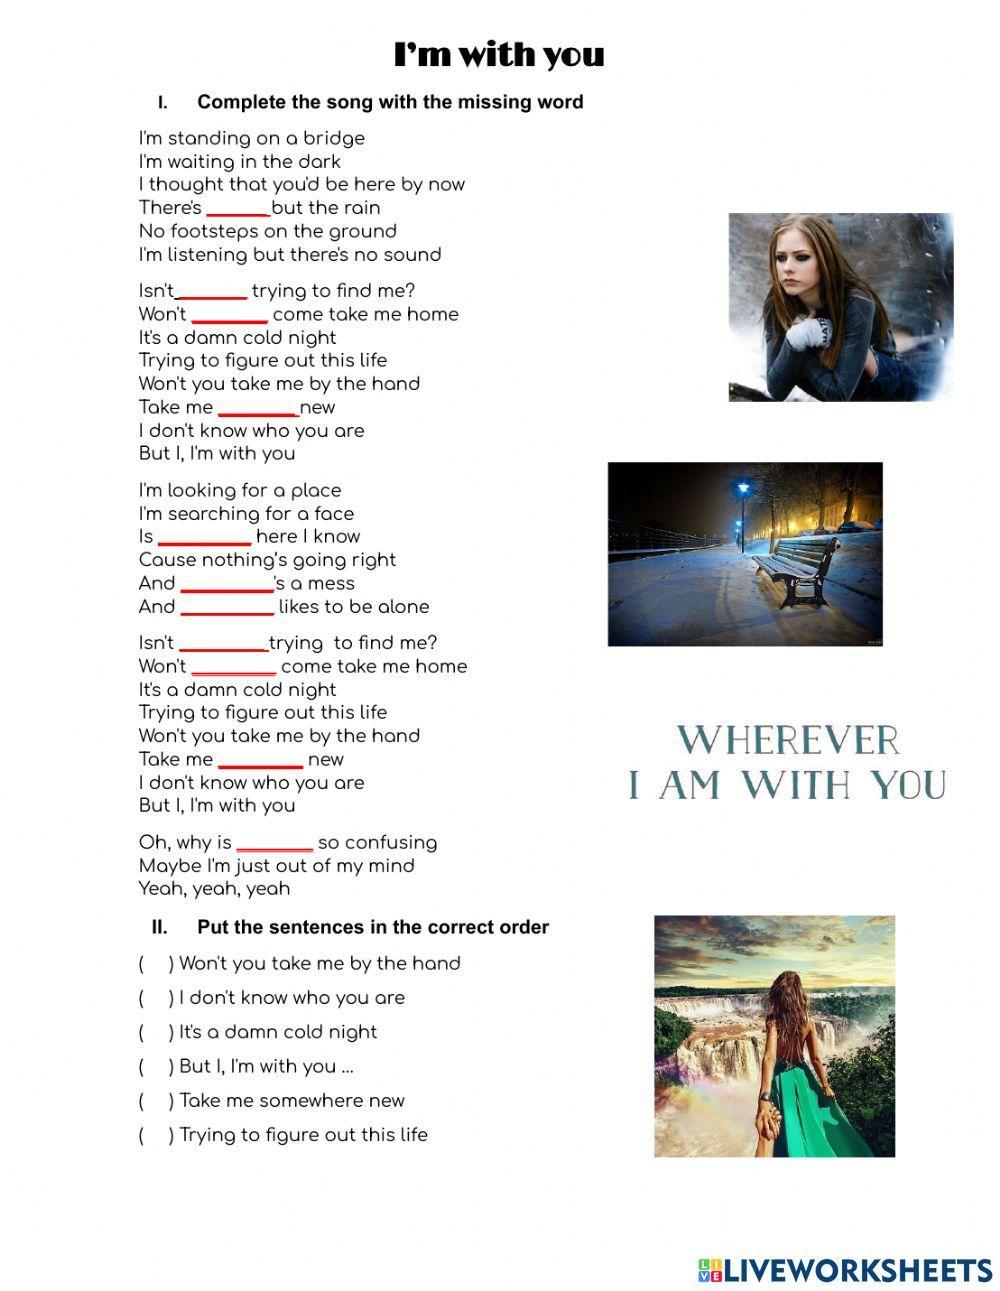 I'm with you - Indefinite pronouns song